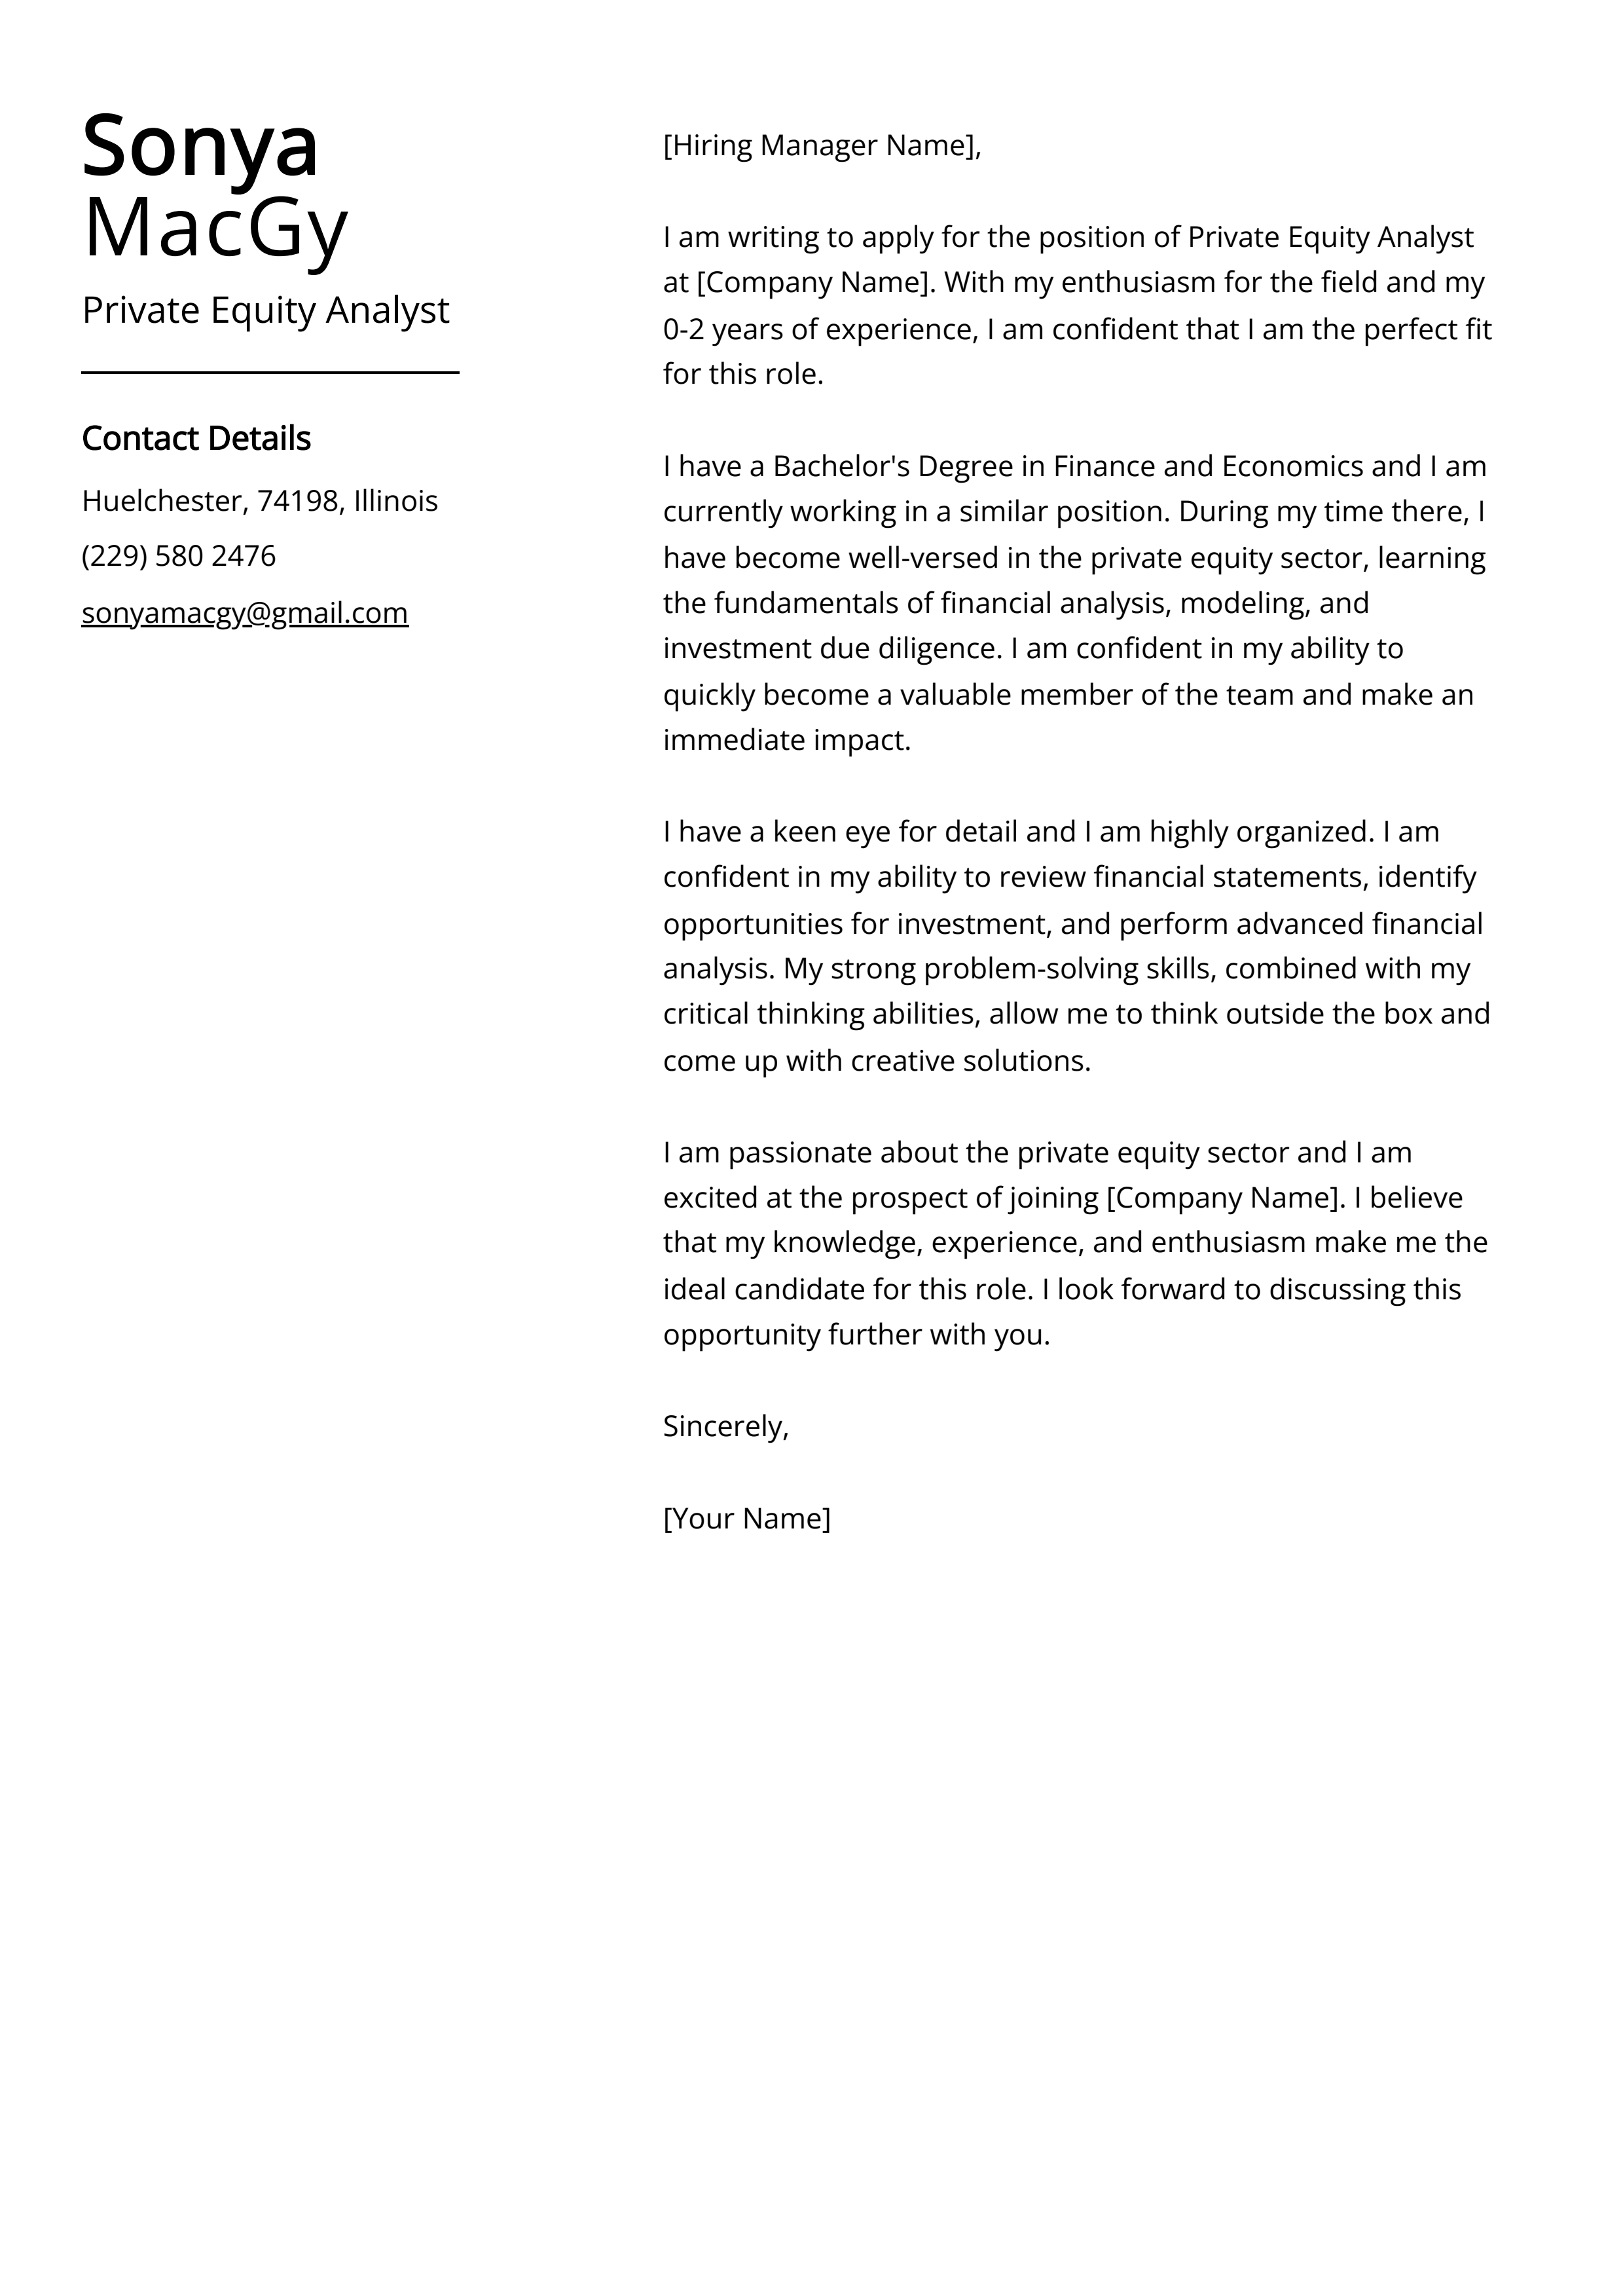 Private Equity Analyst Cover Letter Example